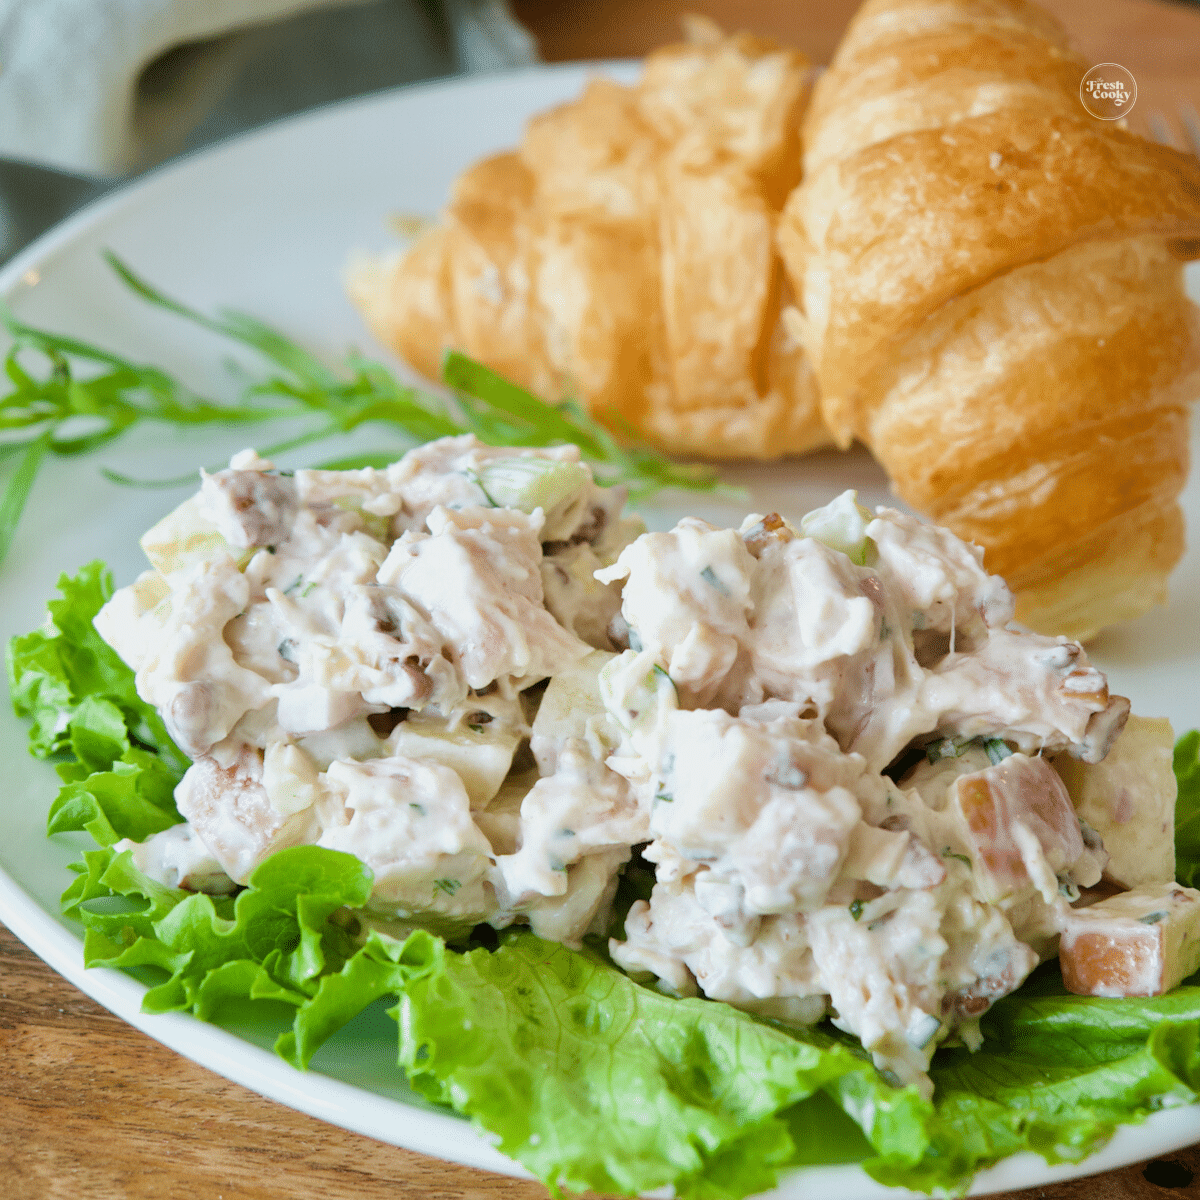 Pecan apple chicken salad on bed of lettuce with croissants behind.